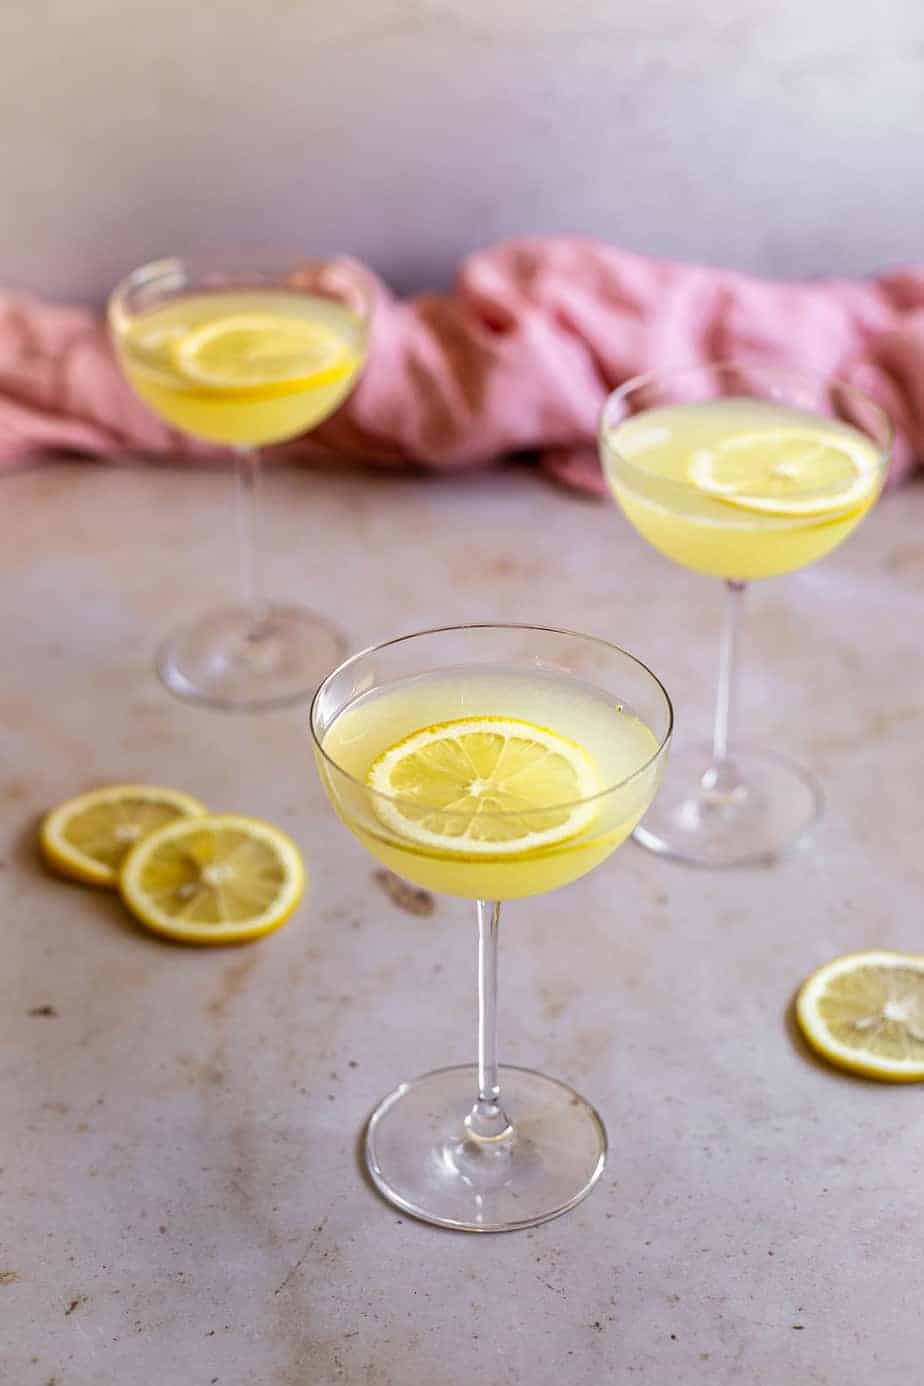 a 45 degree angle view of three limoncello martinis in coupe glasses, lemon slices on the table, lemon slices floating in the glasses